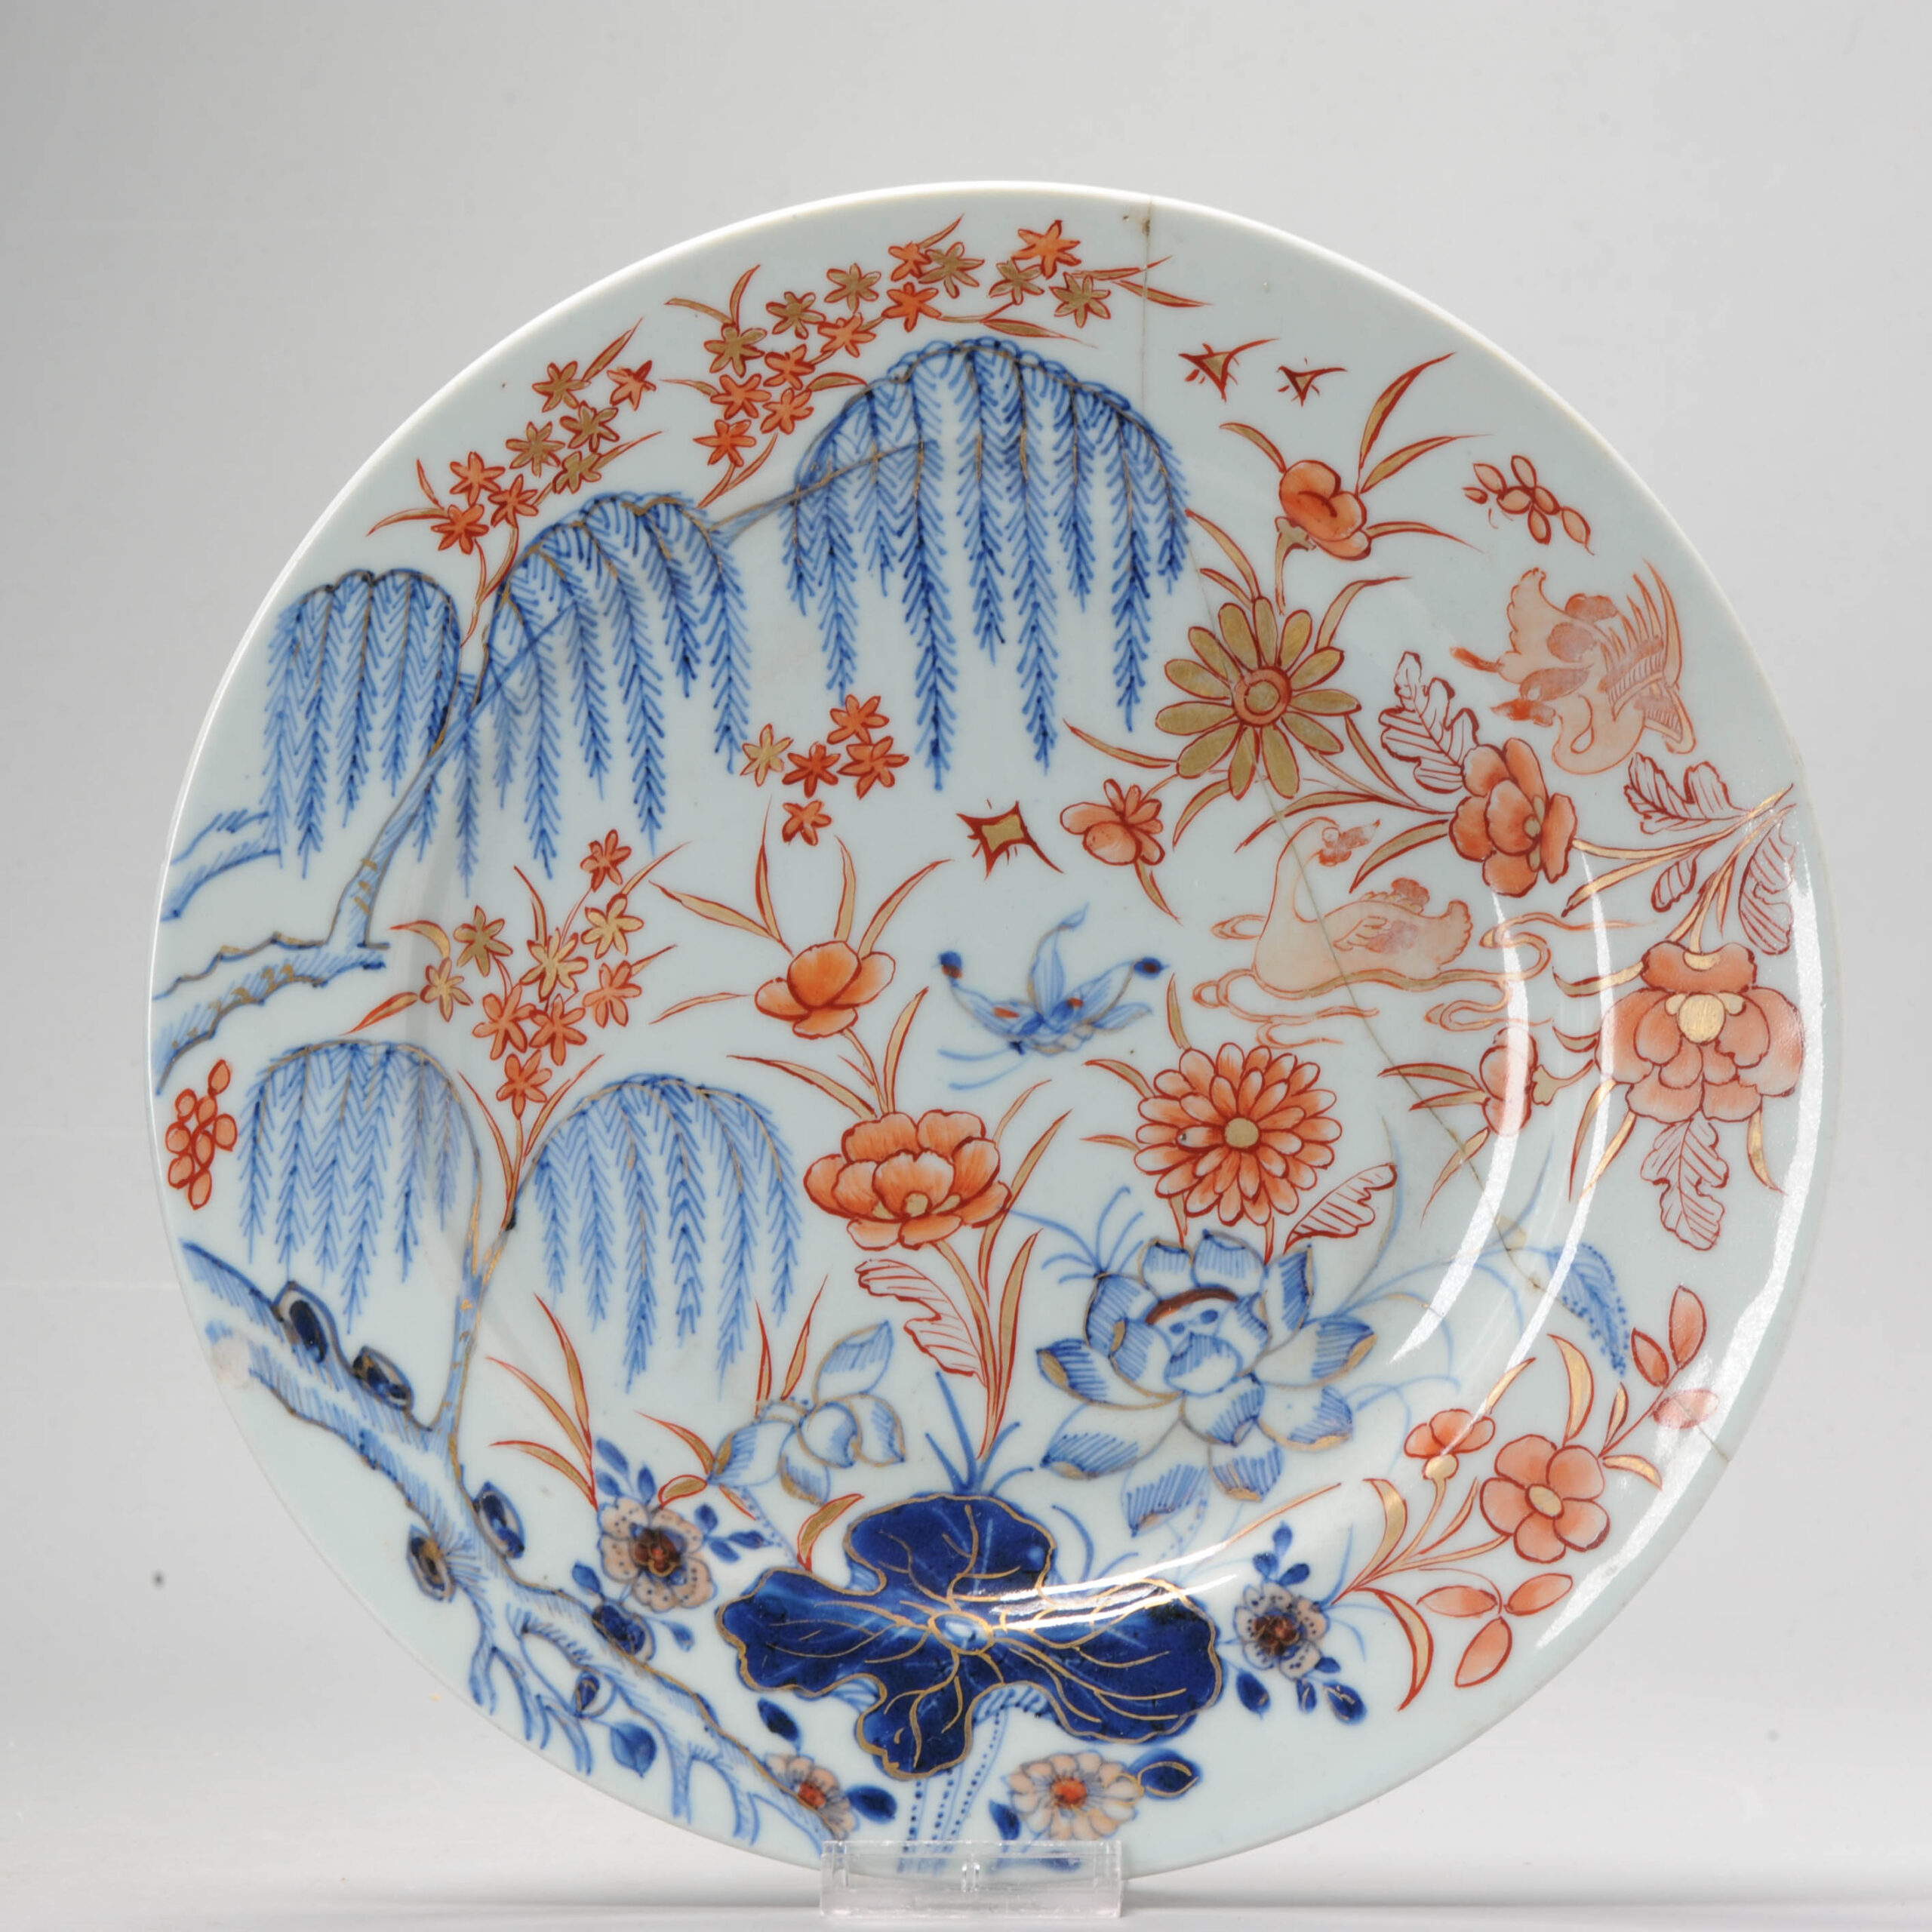 A rare Chinese Porcelain Imari Plate 1720-1740 Period Floral and Ducks